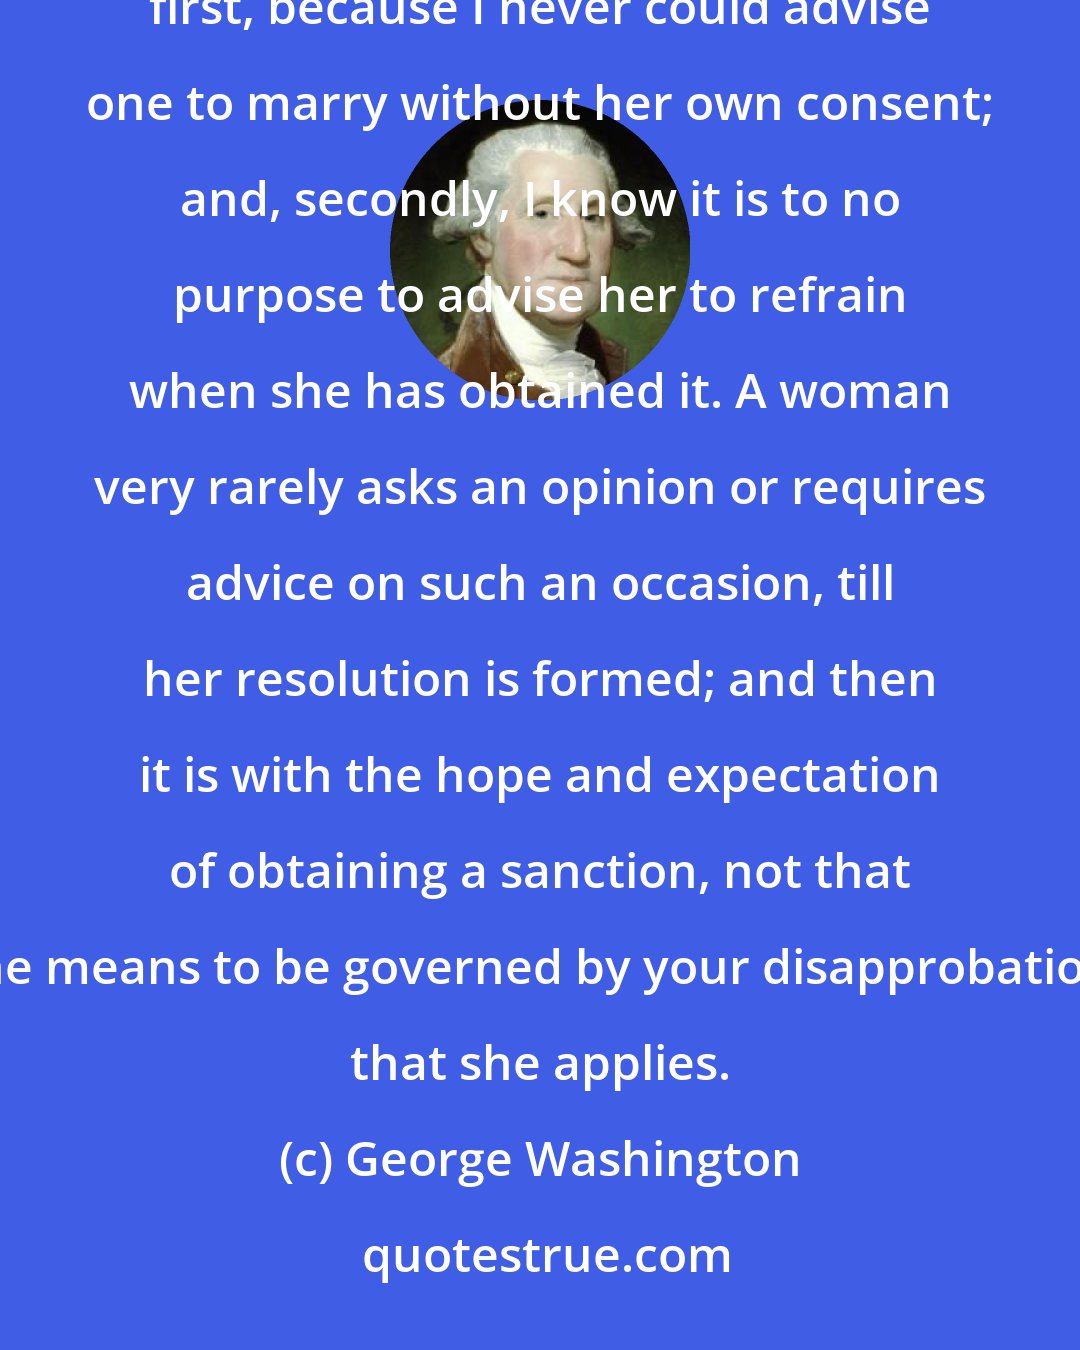 George Washington: I never did, nor do I believe I ever shall, give advice to a woman who is setting out on a matrimonial voyage; first, because I never could advise one to marry without her own consent; and, secondly, I know it is to no purpose to advise her to refrain when she has obtained it. A woman very rarely asks an opinion or requires advice on such an occasion, till her resolution is formed; and then it is with the hope and expectation of obtaining a sanction, not that she means to be governed by your disapprobation, that she applies.